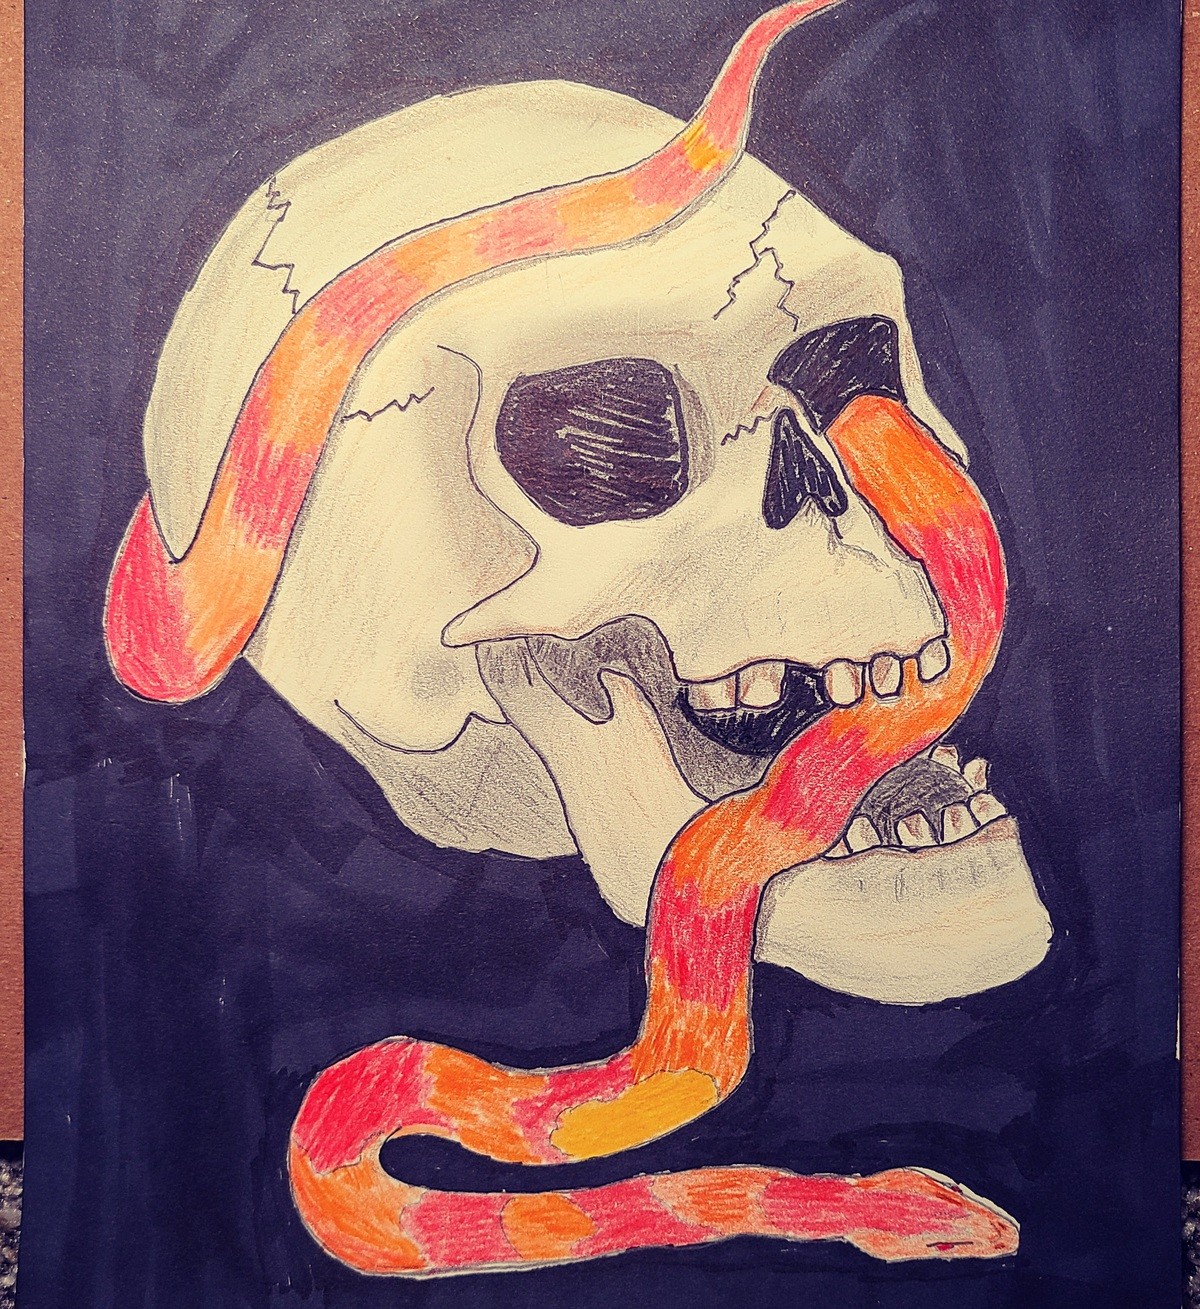 Skulls & Snakes are badass. Since my last skull came out neato I decided to make another one and include my late corn snake Noodle. She was my baby girl and loo